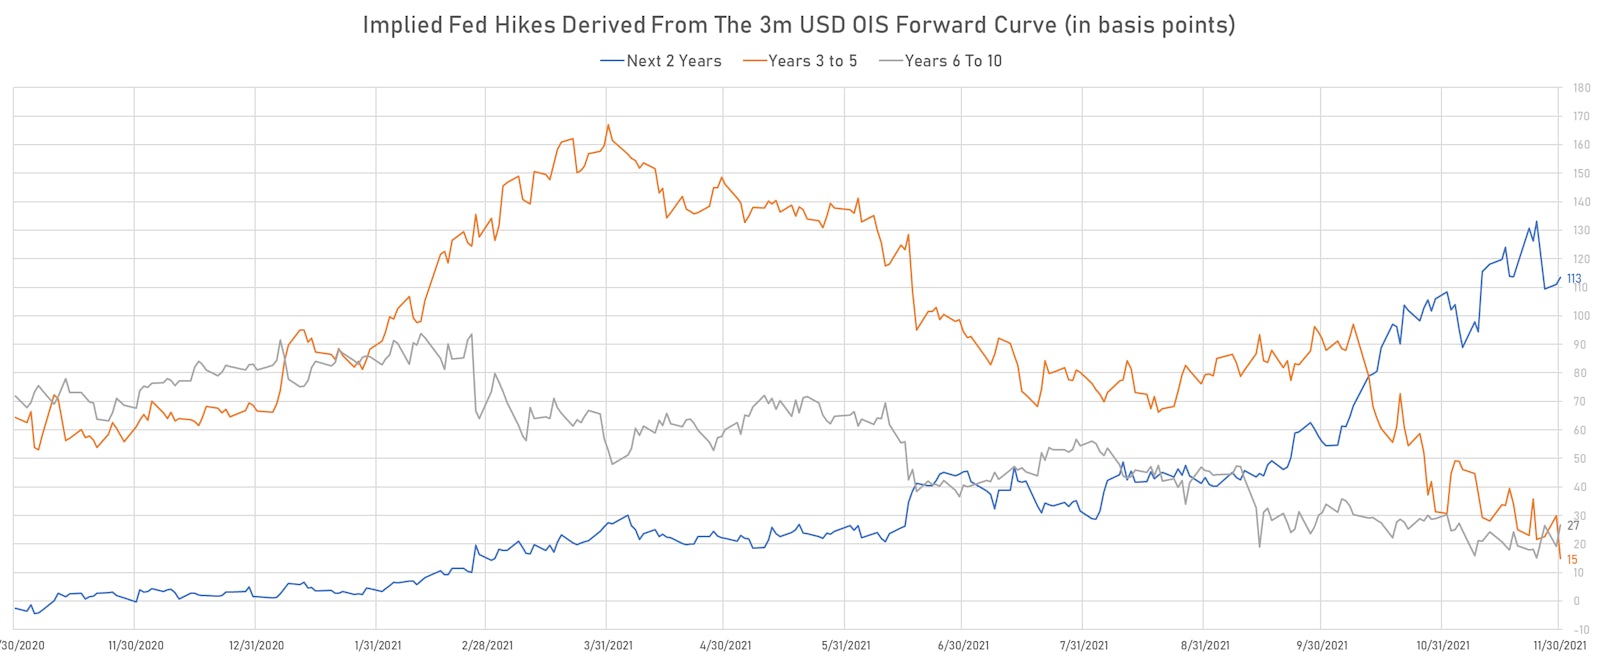 Fed Hikes Priced Into The 3M USD OIS Forward Curve | Sources: ϕpost, Refinitiv data